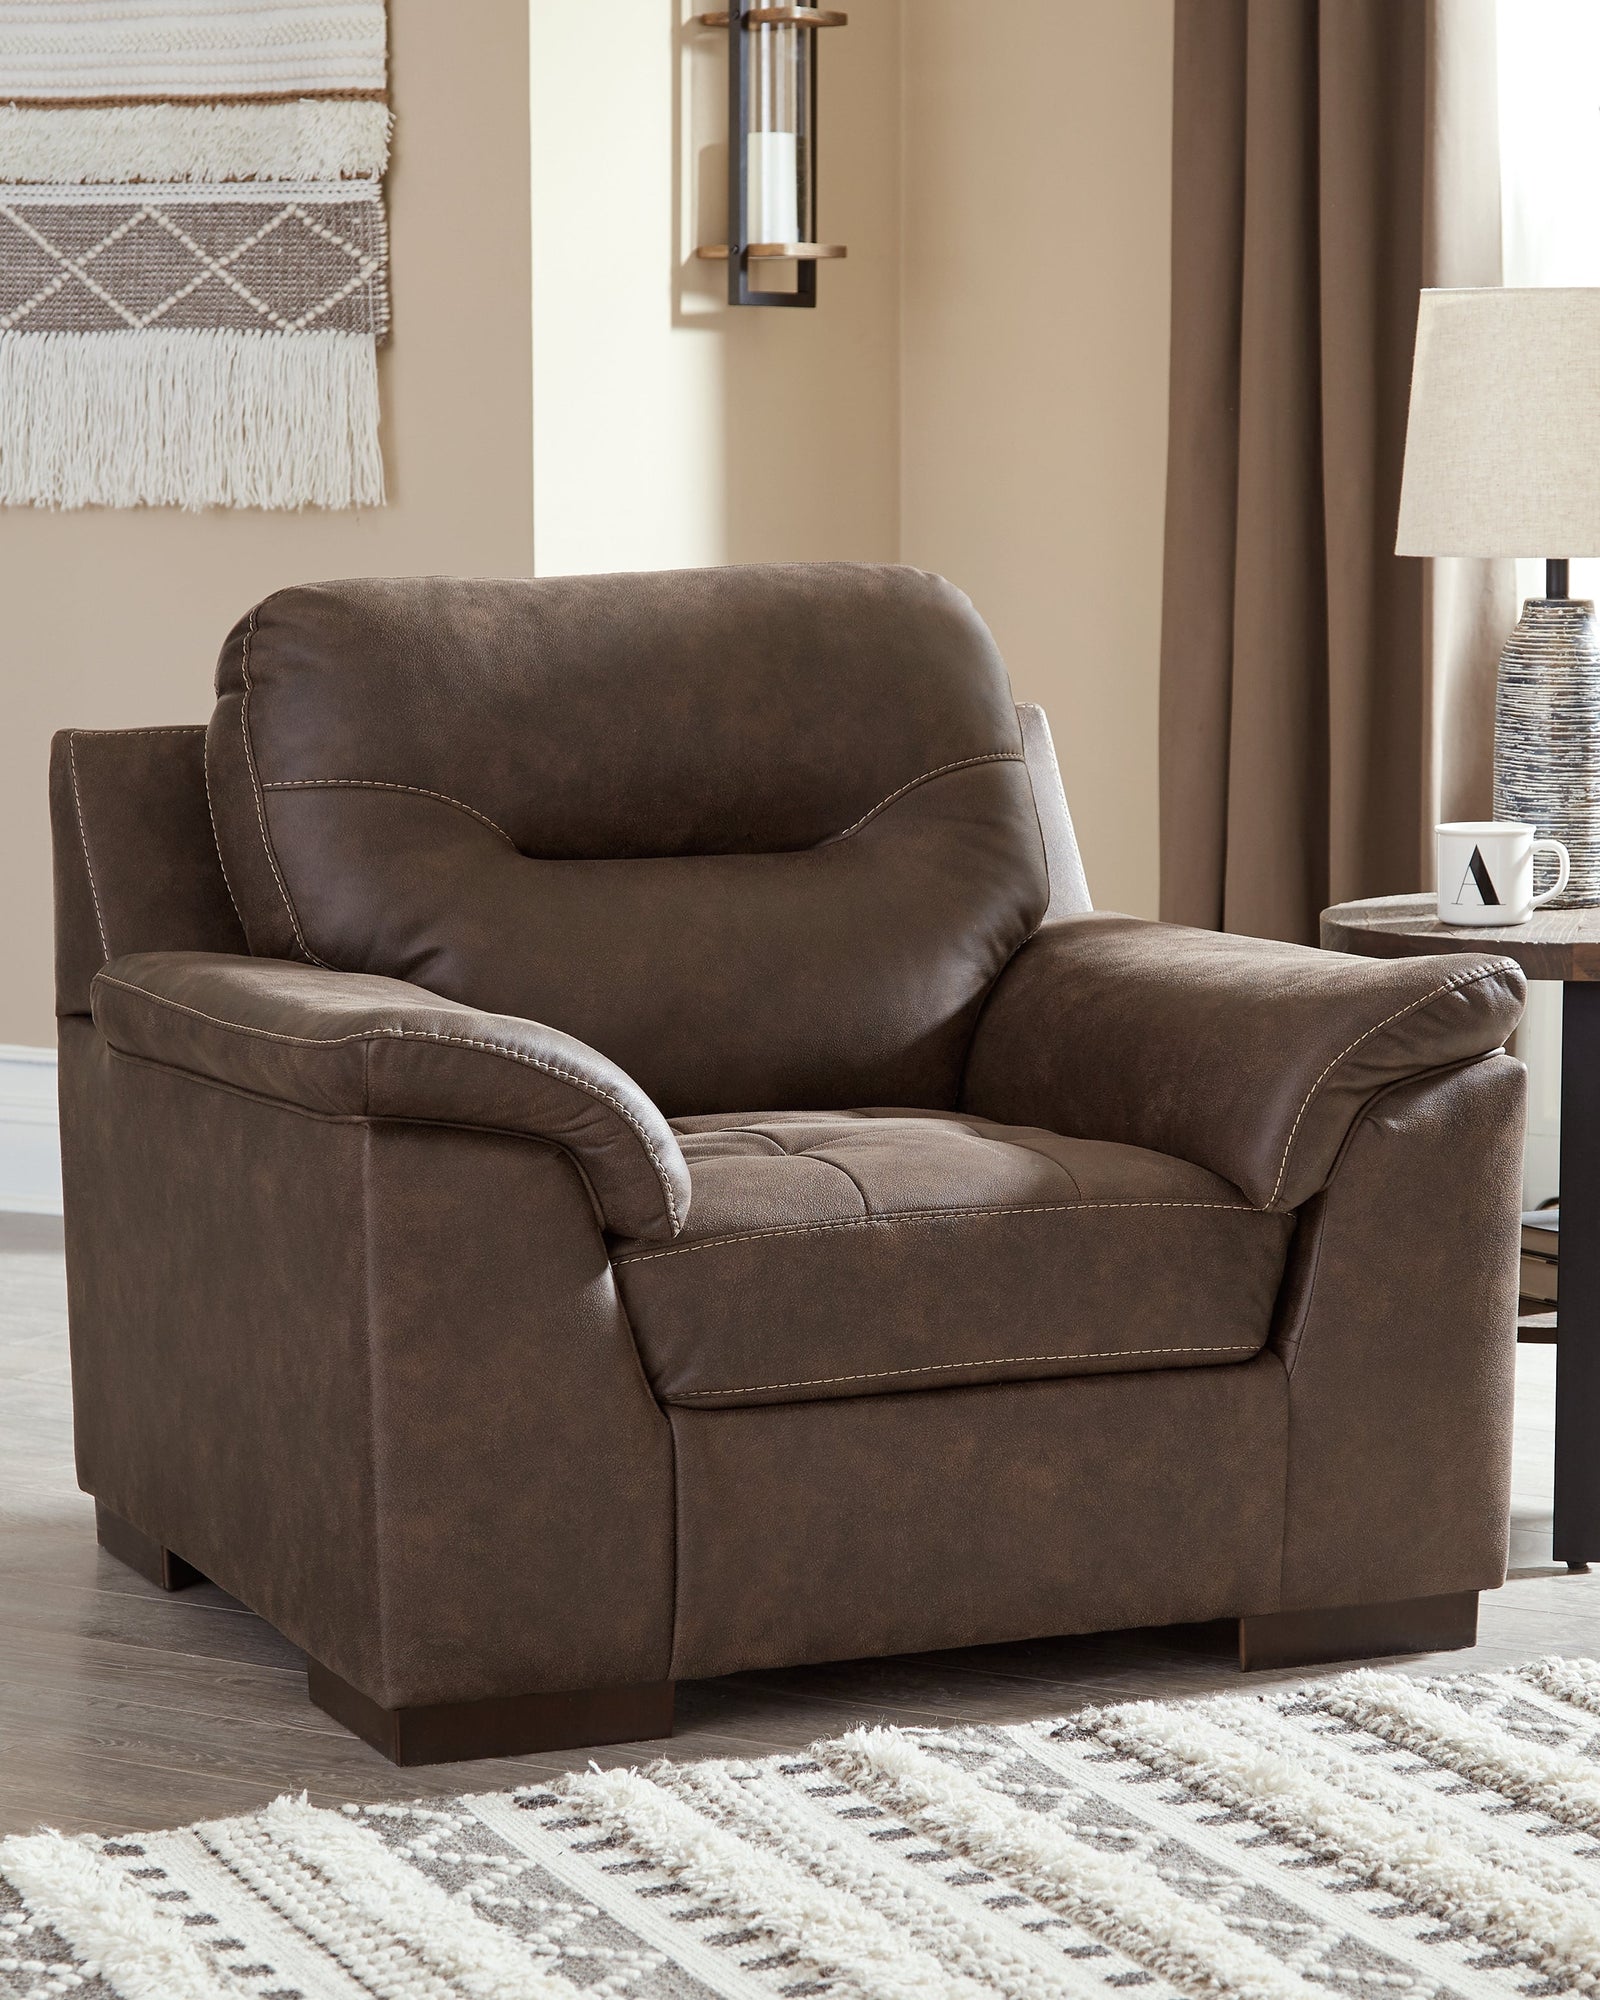 Maderla Walnut Faux Leather Chair